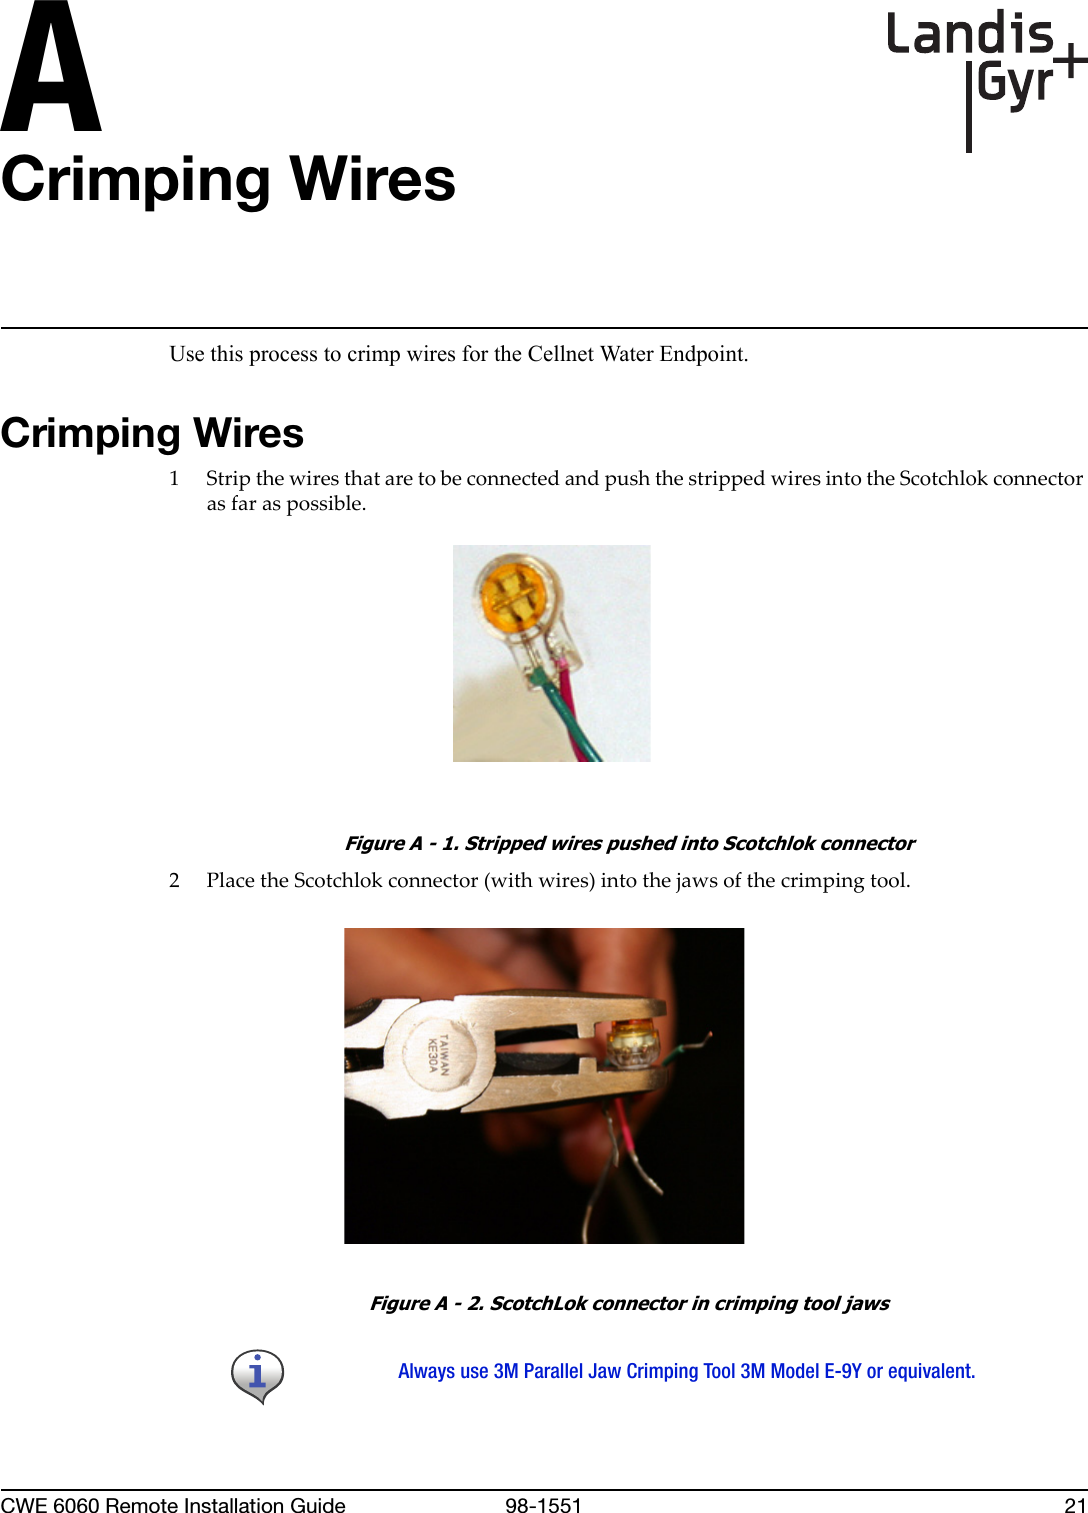 ACWE 6060 Remote Installation Guide 98-1551 21Crimping WiresUse this process to crimp wires for the Cellnet Water Endpoint.Crimping Wires1StripthewiresthataretobeconnectedandpushthestrippedwiresintotheScotchlokconnectorasfaraspossible.Figure A - 1. Stripped wires pushed into Scotchlok connector2PlacetheScotchlokconnector(withwires)intothejawsofthecrimpingtool.Figure A - 2. ScotchLok connector in crimping tool jawsAlways use 3M Parallel Jaw Crimping Tool 3M Model E-9Y or equivalent.